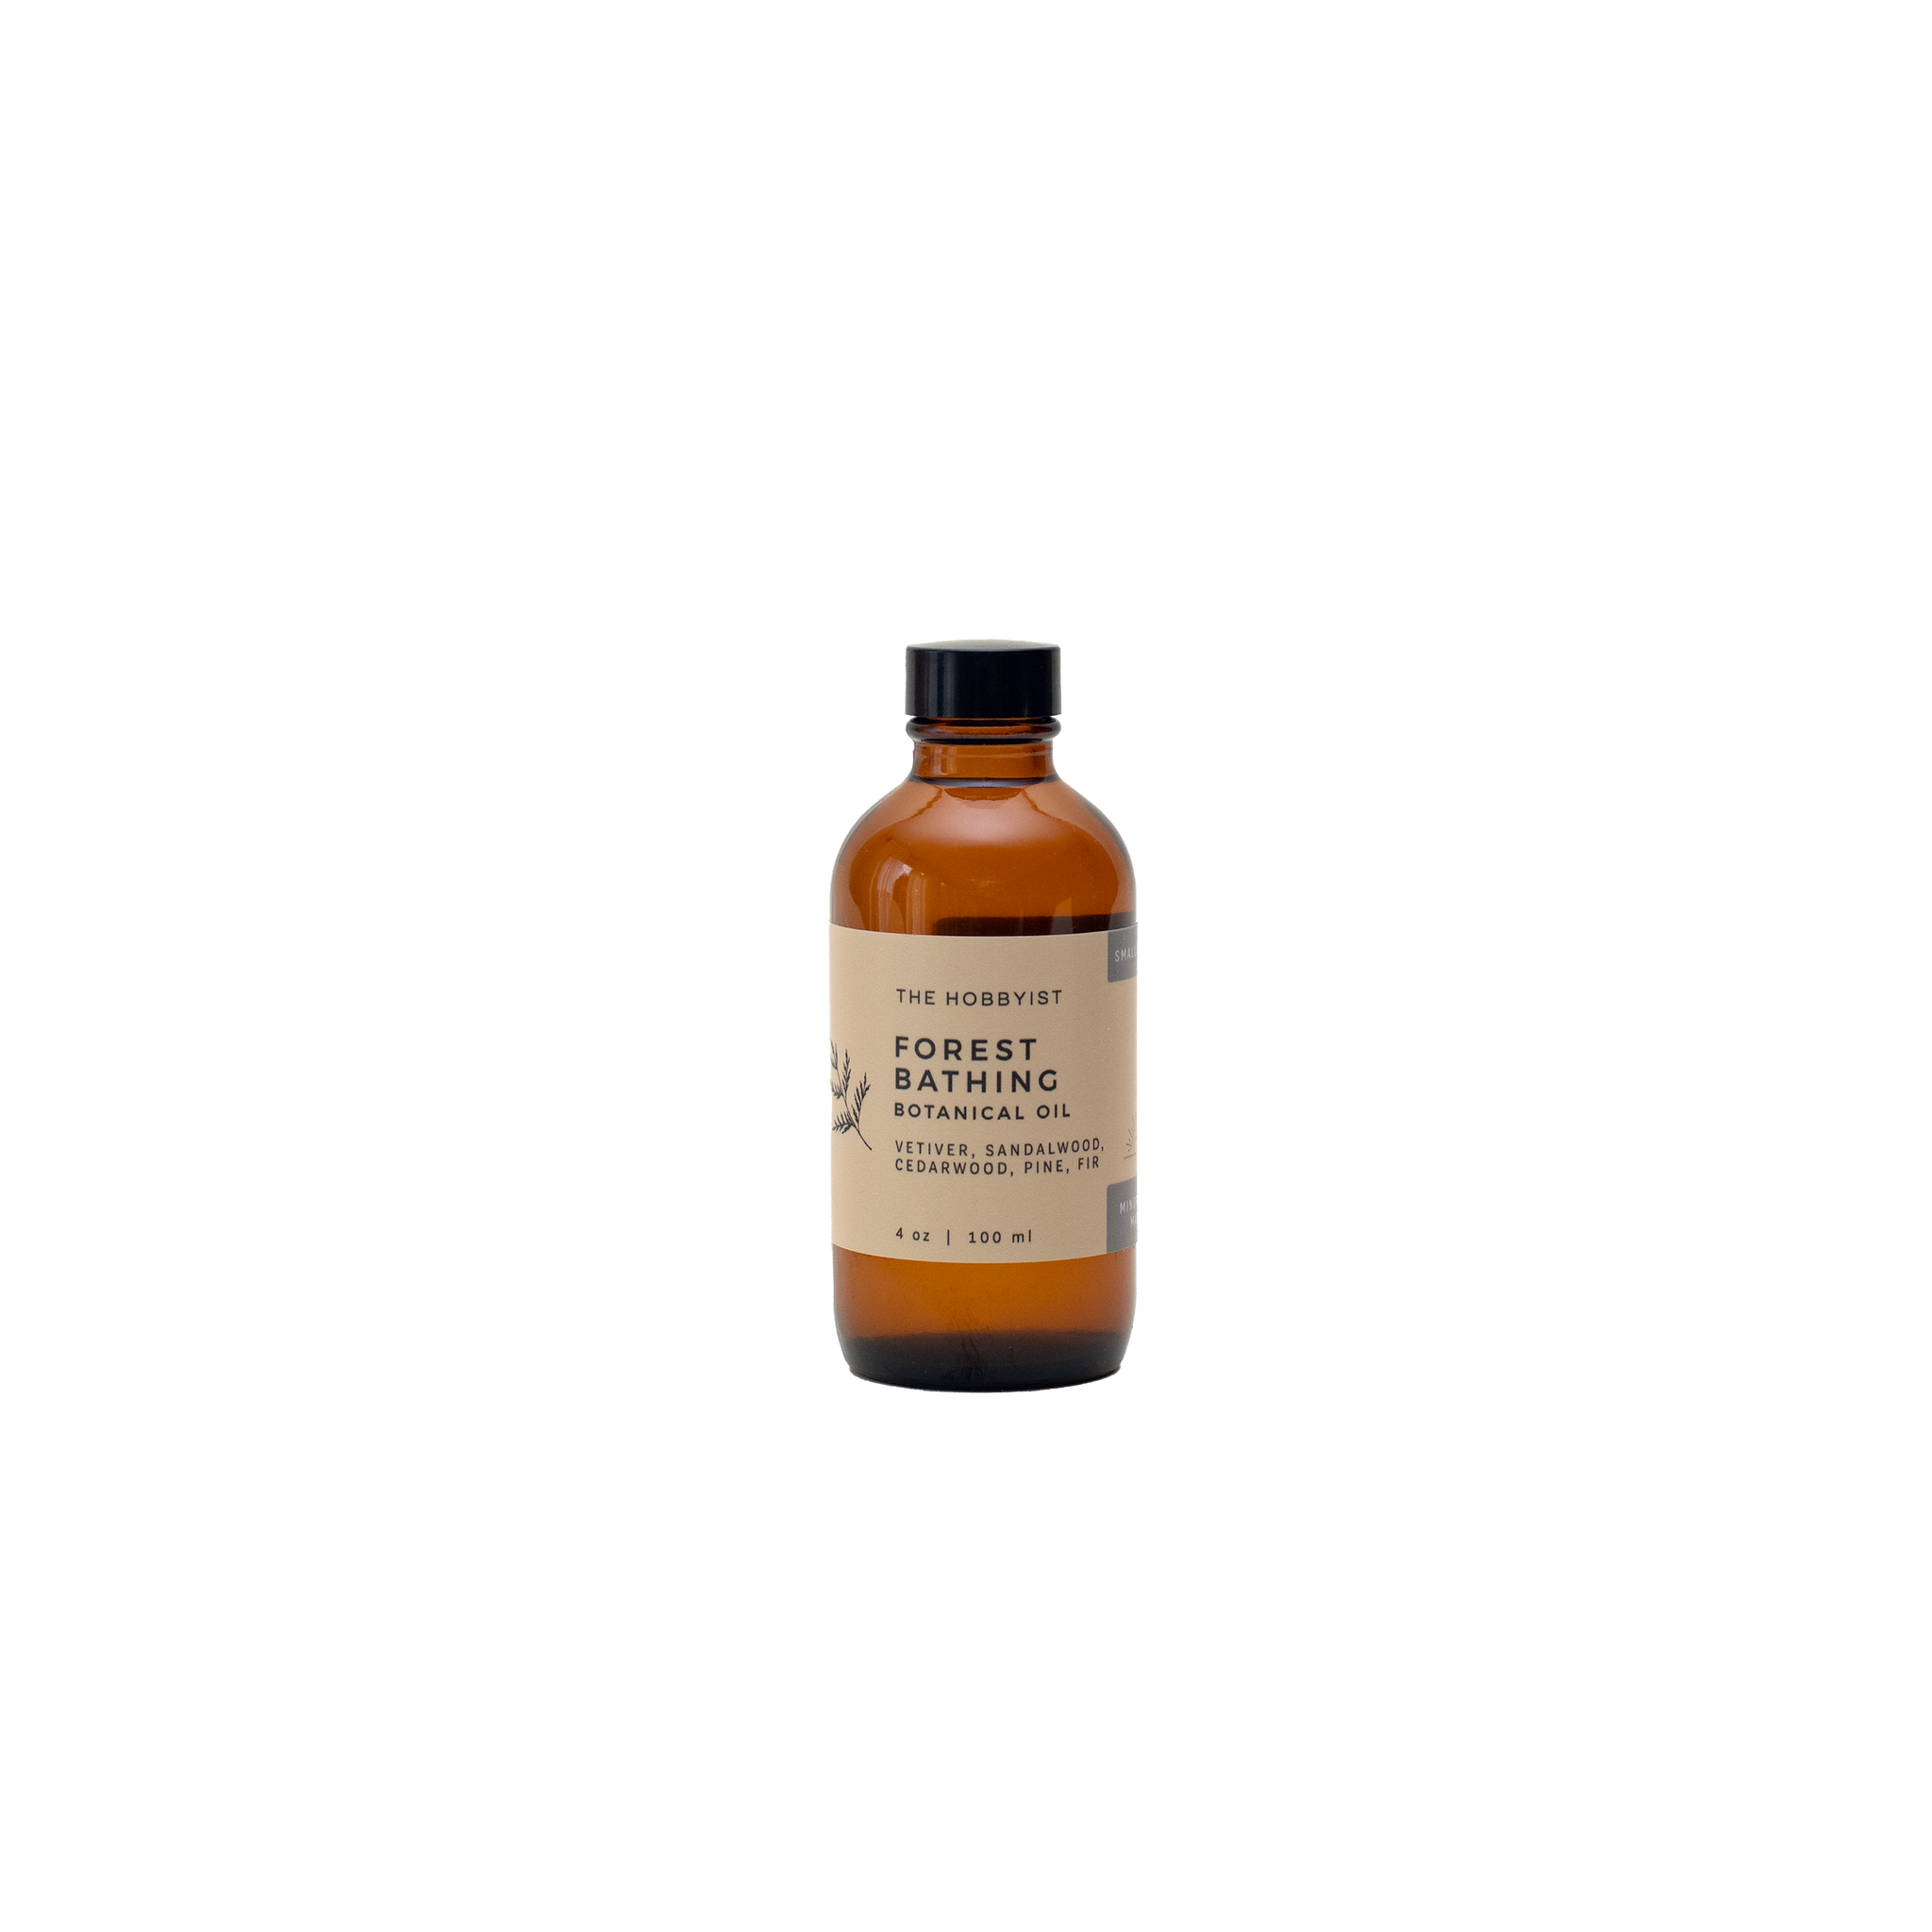 Product photo of the Forest Bathing Body Oil from our Botanical Oils Collection